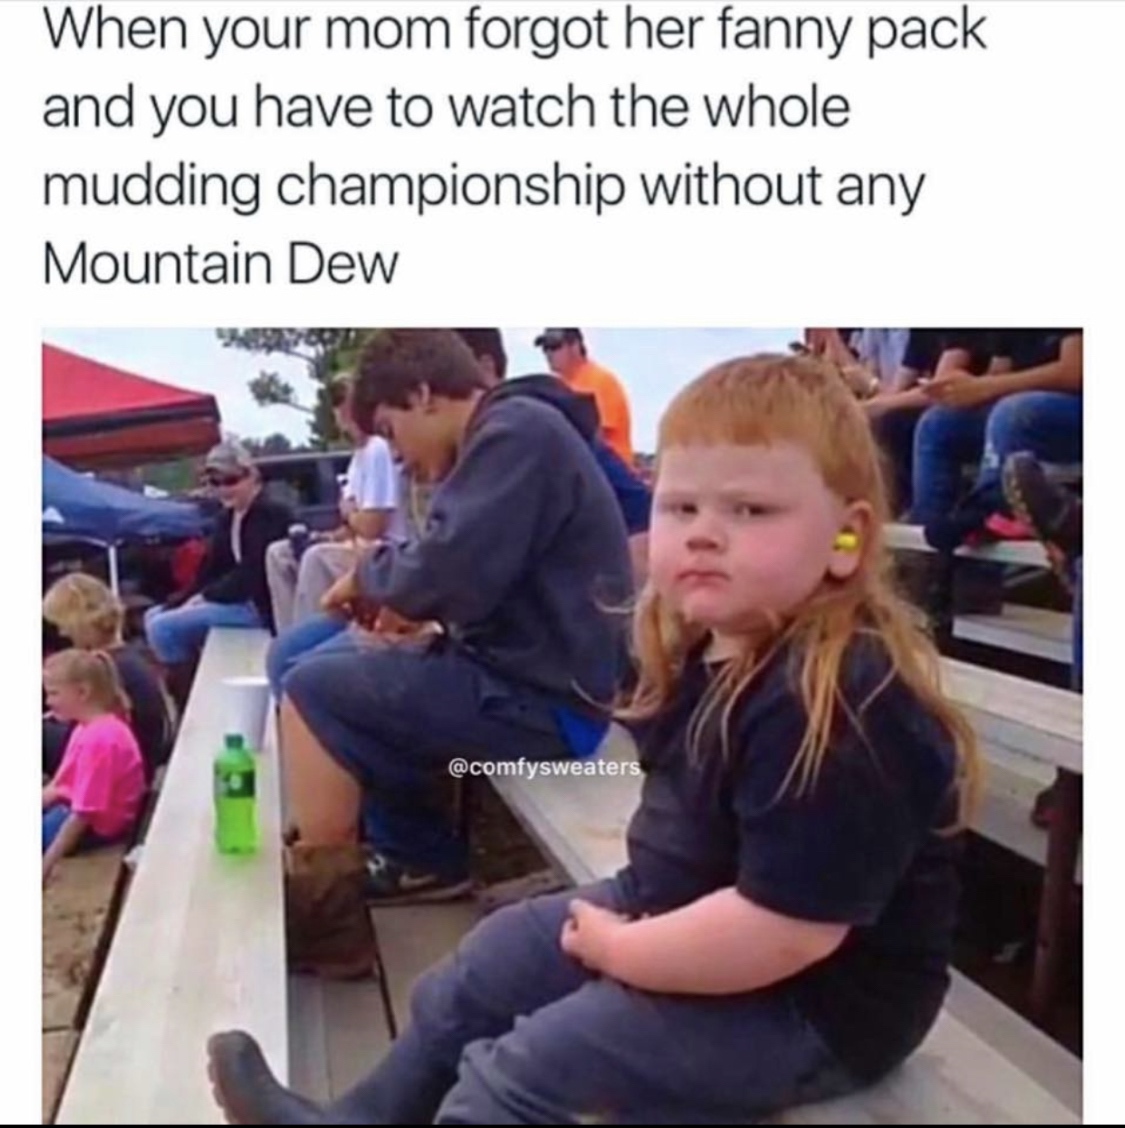 redneck kid - When your mom forgot her fanny pack and you have to watch the whole mudding championship without any Mountain Dew